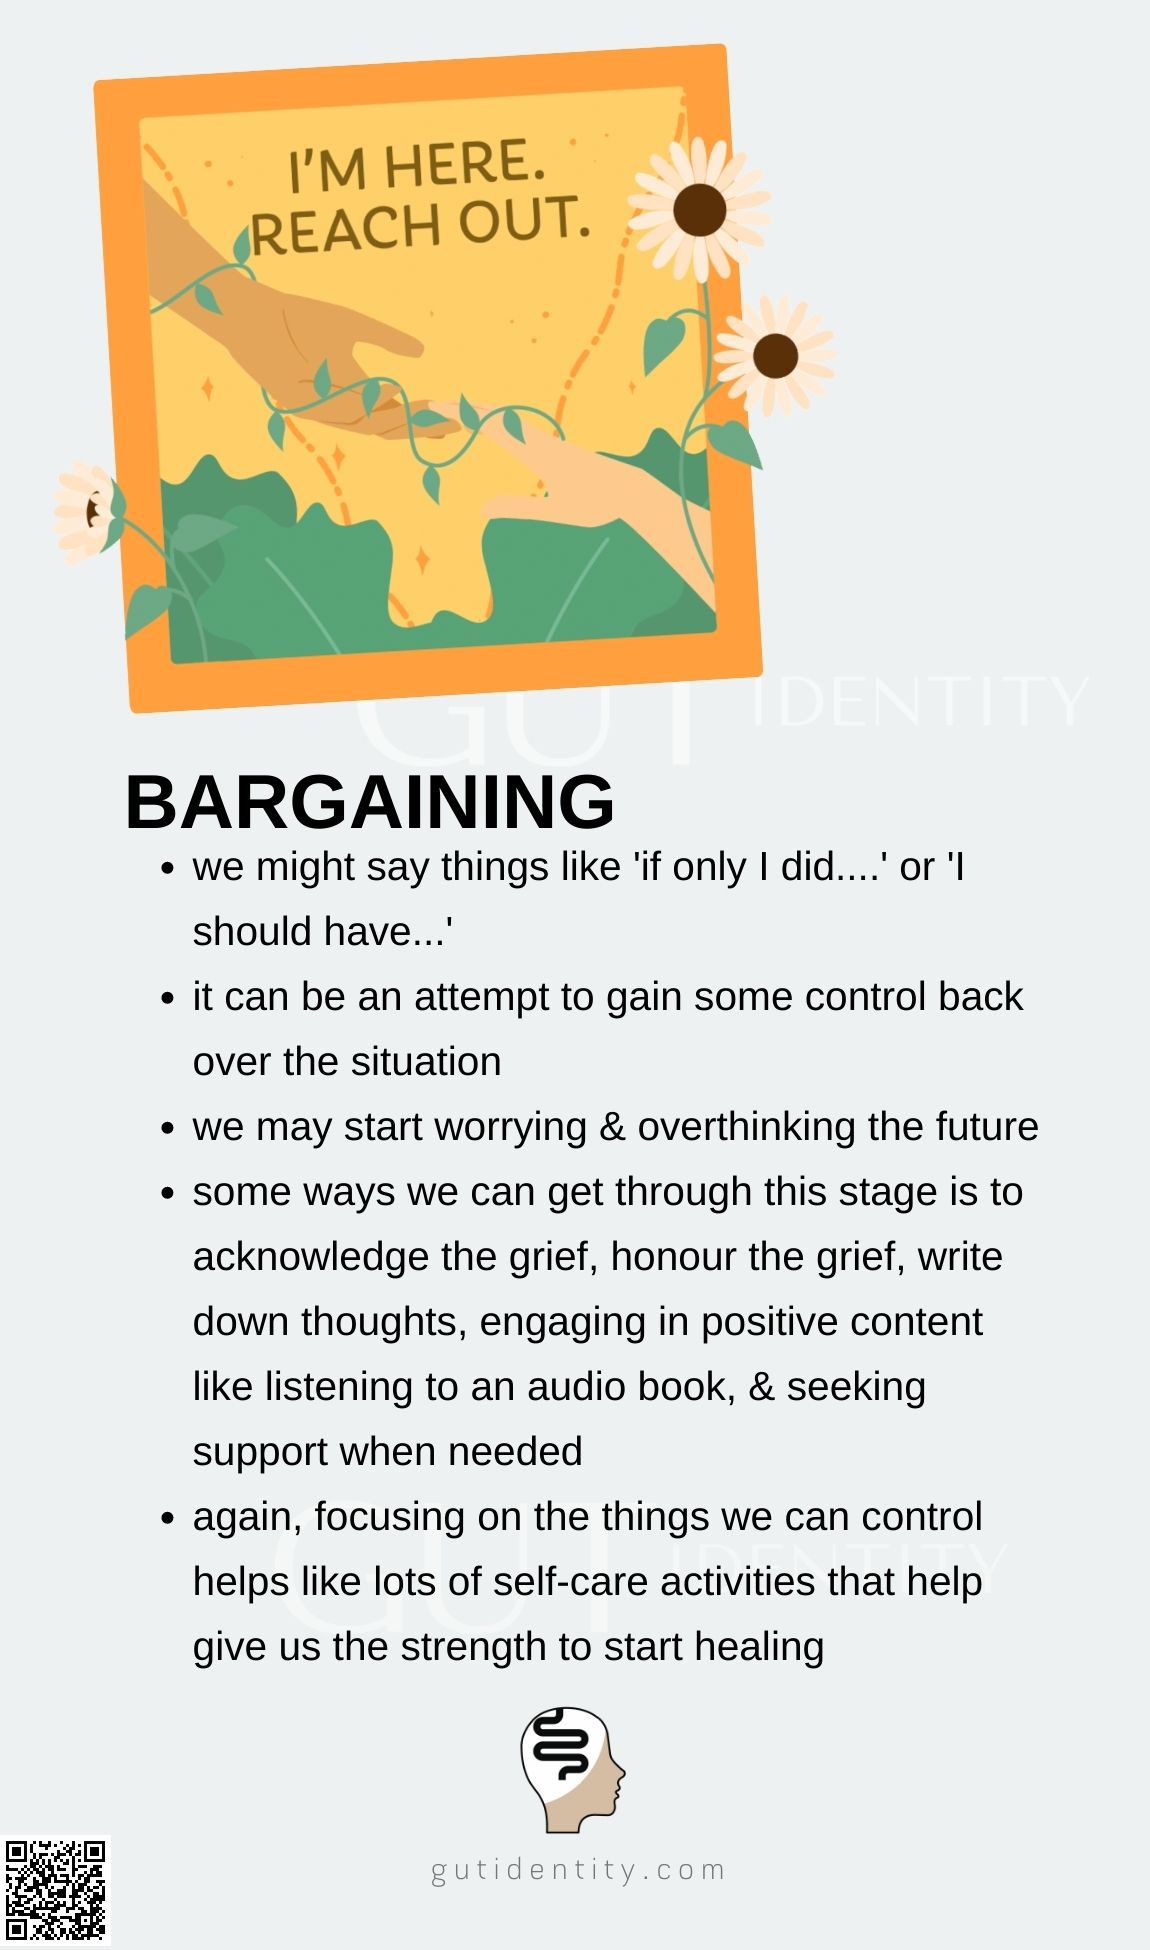 The bargaining stage in grief